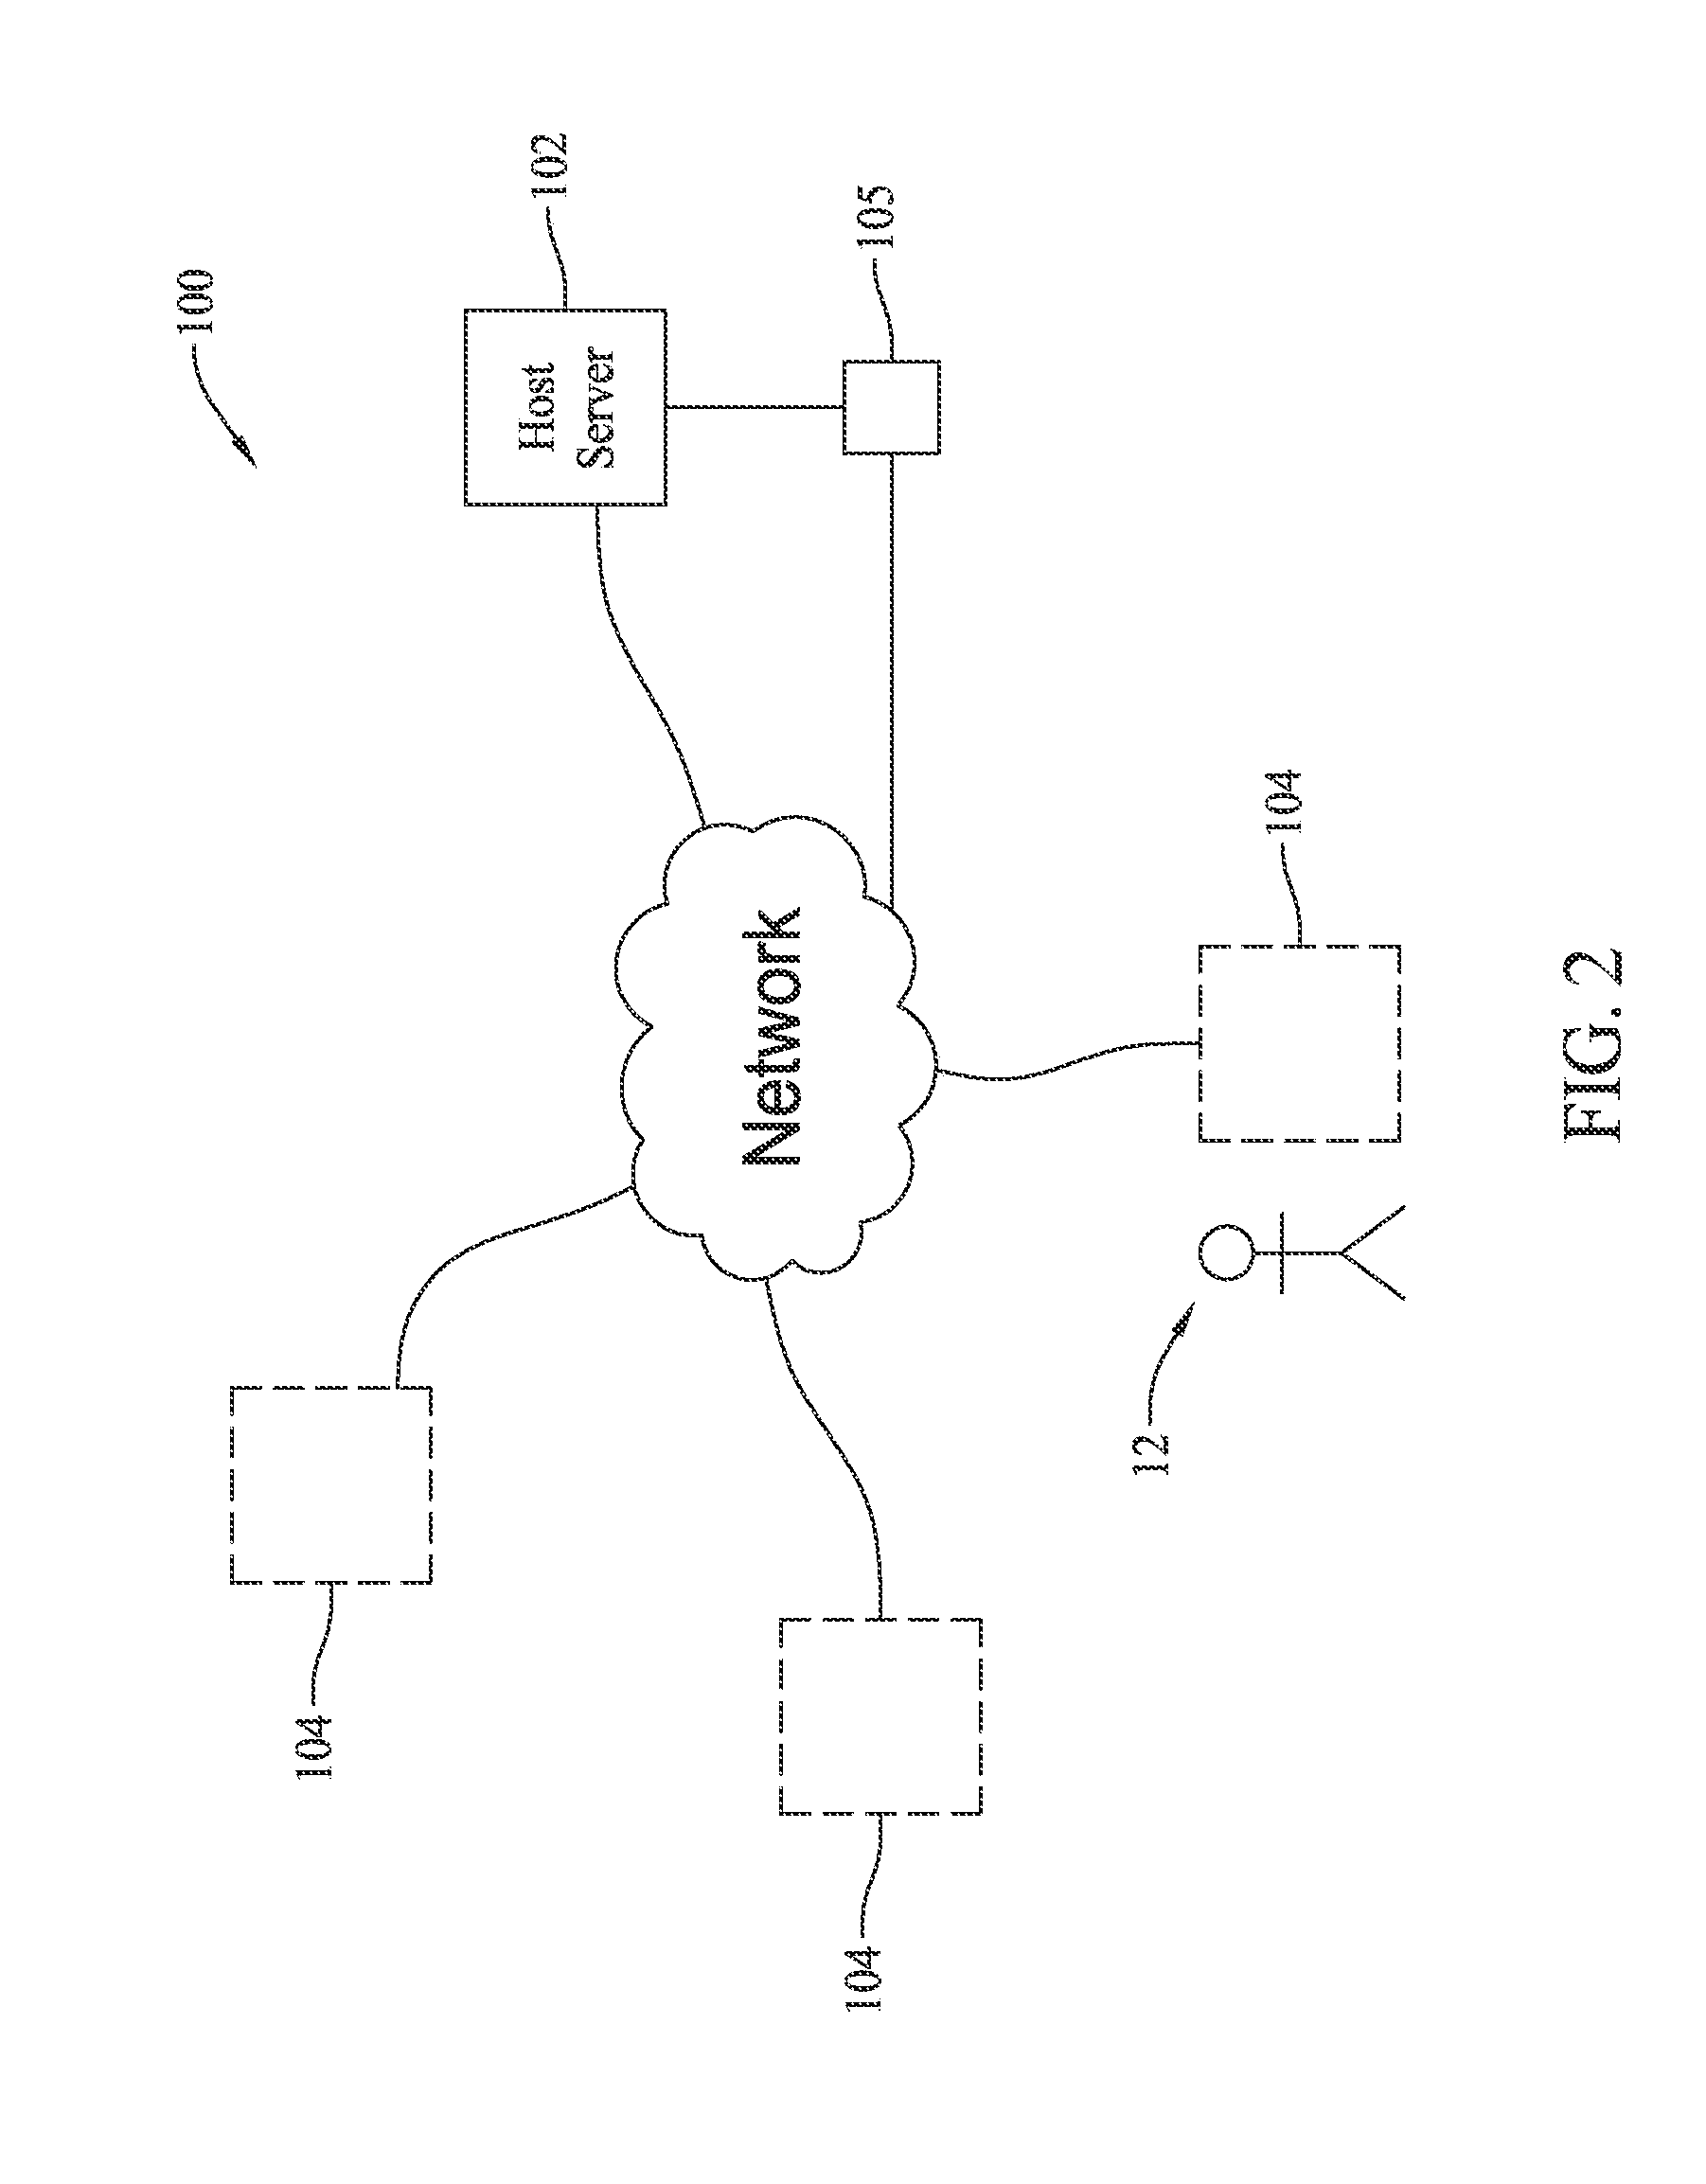 Systems and methods for use in diagnosing a medical condition of a patient